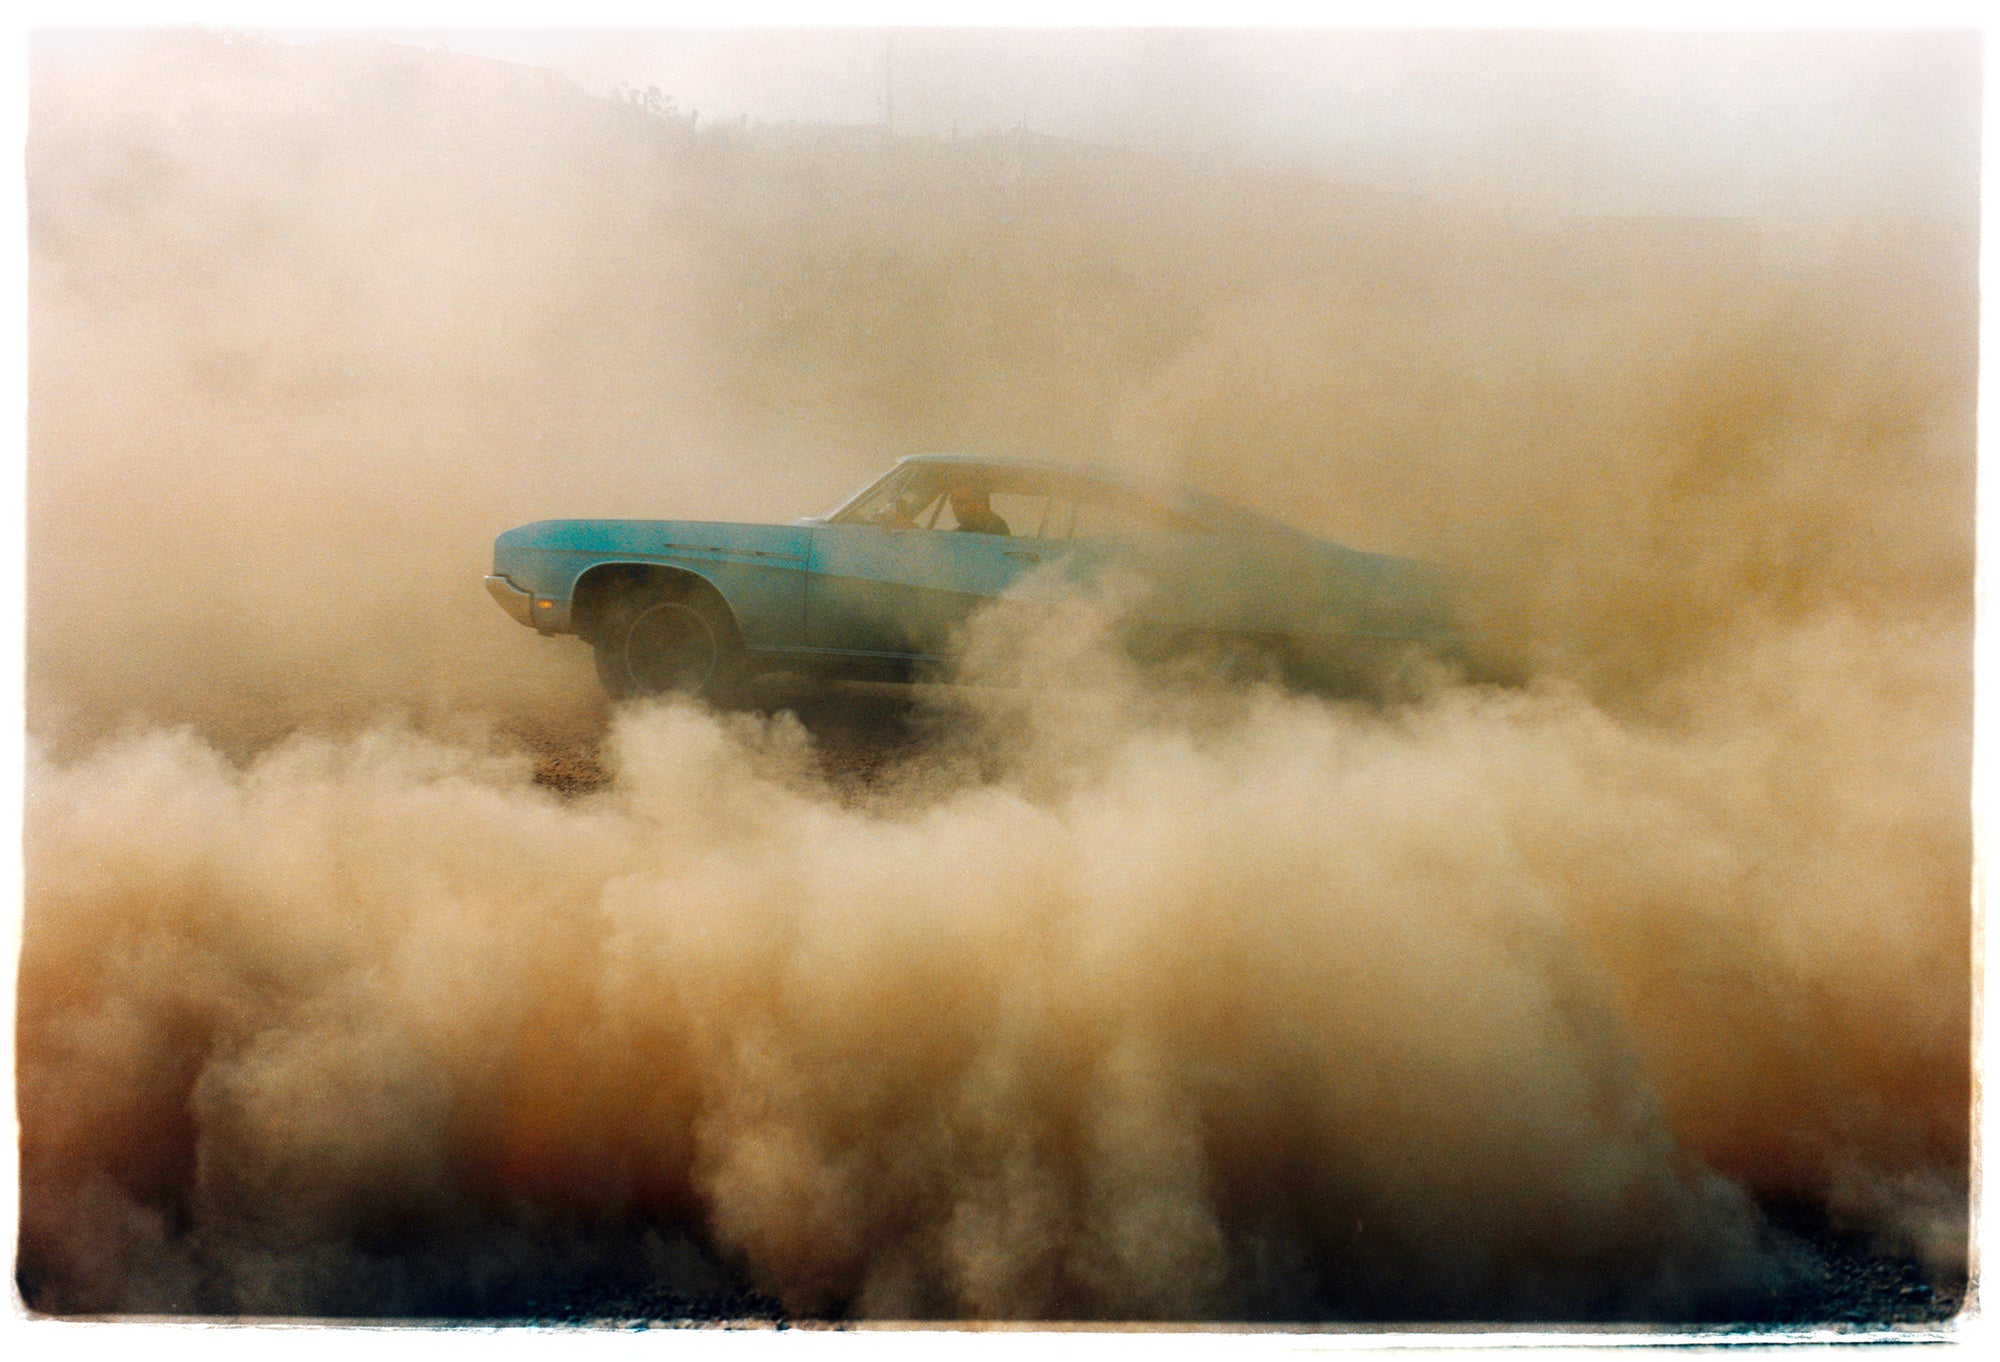 Photograph by Richard Heeps. A side view of a light blue Buick car moving and slightly obscured by the dust clouds which it has created.